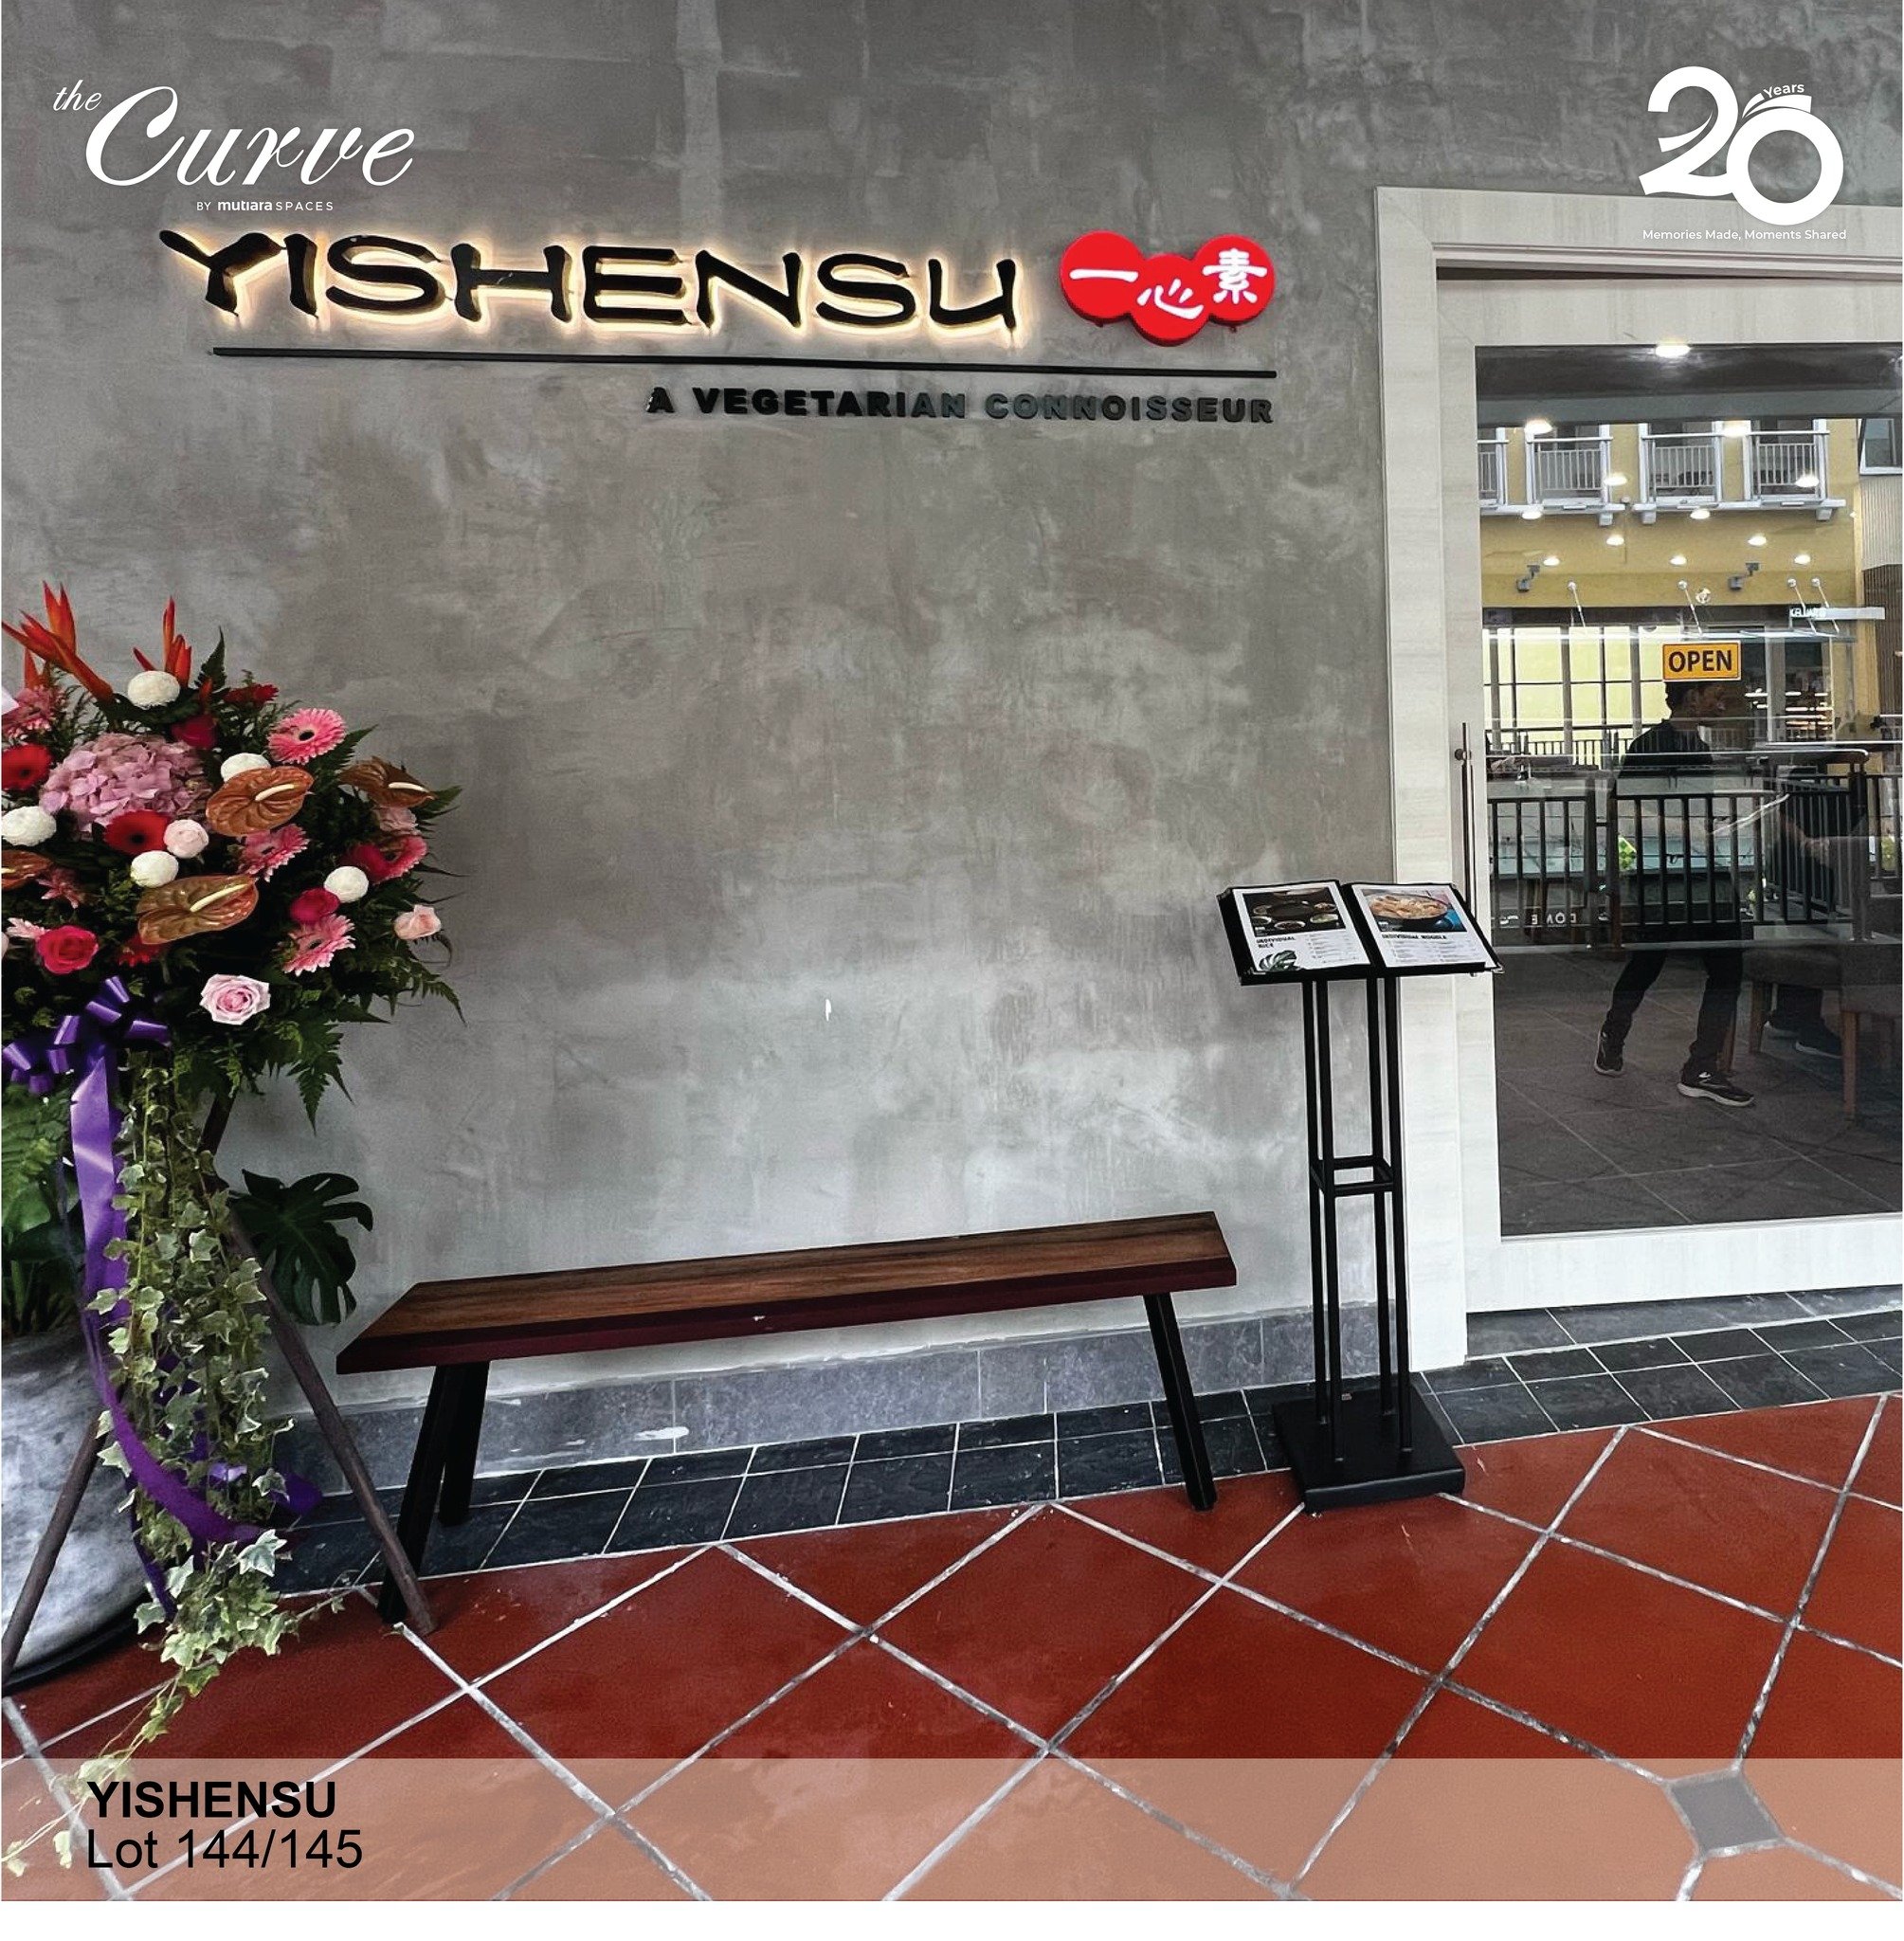 Craving a flavorful and satisfying vegetarian meal? Look no further than Yishensu, now open at the Curve!  We've got something for everyone😋. Tag a friend who needs to try this with you! 

#theCurve #theCurvemall #theCurveMutiaraDamansara #yishensu